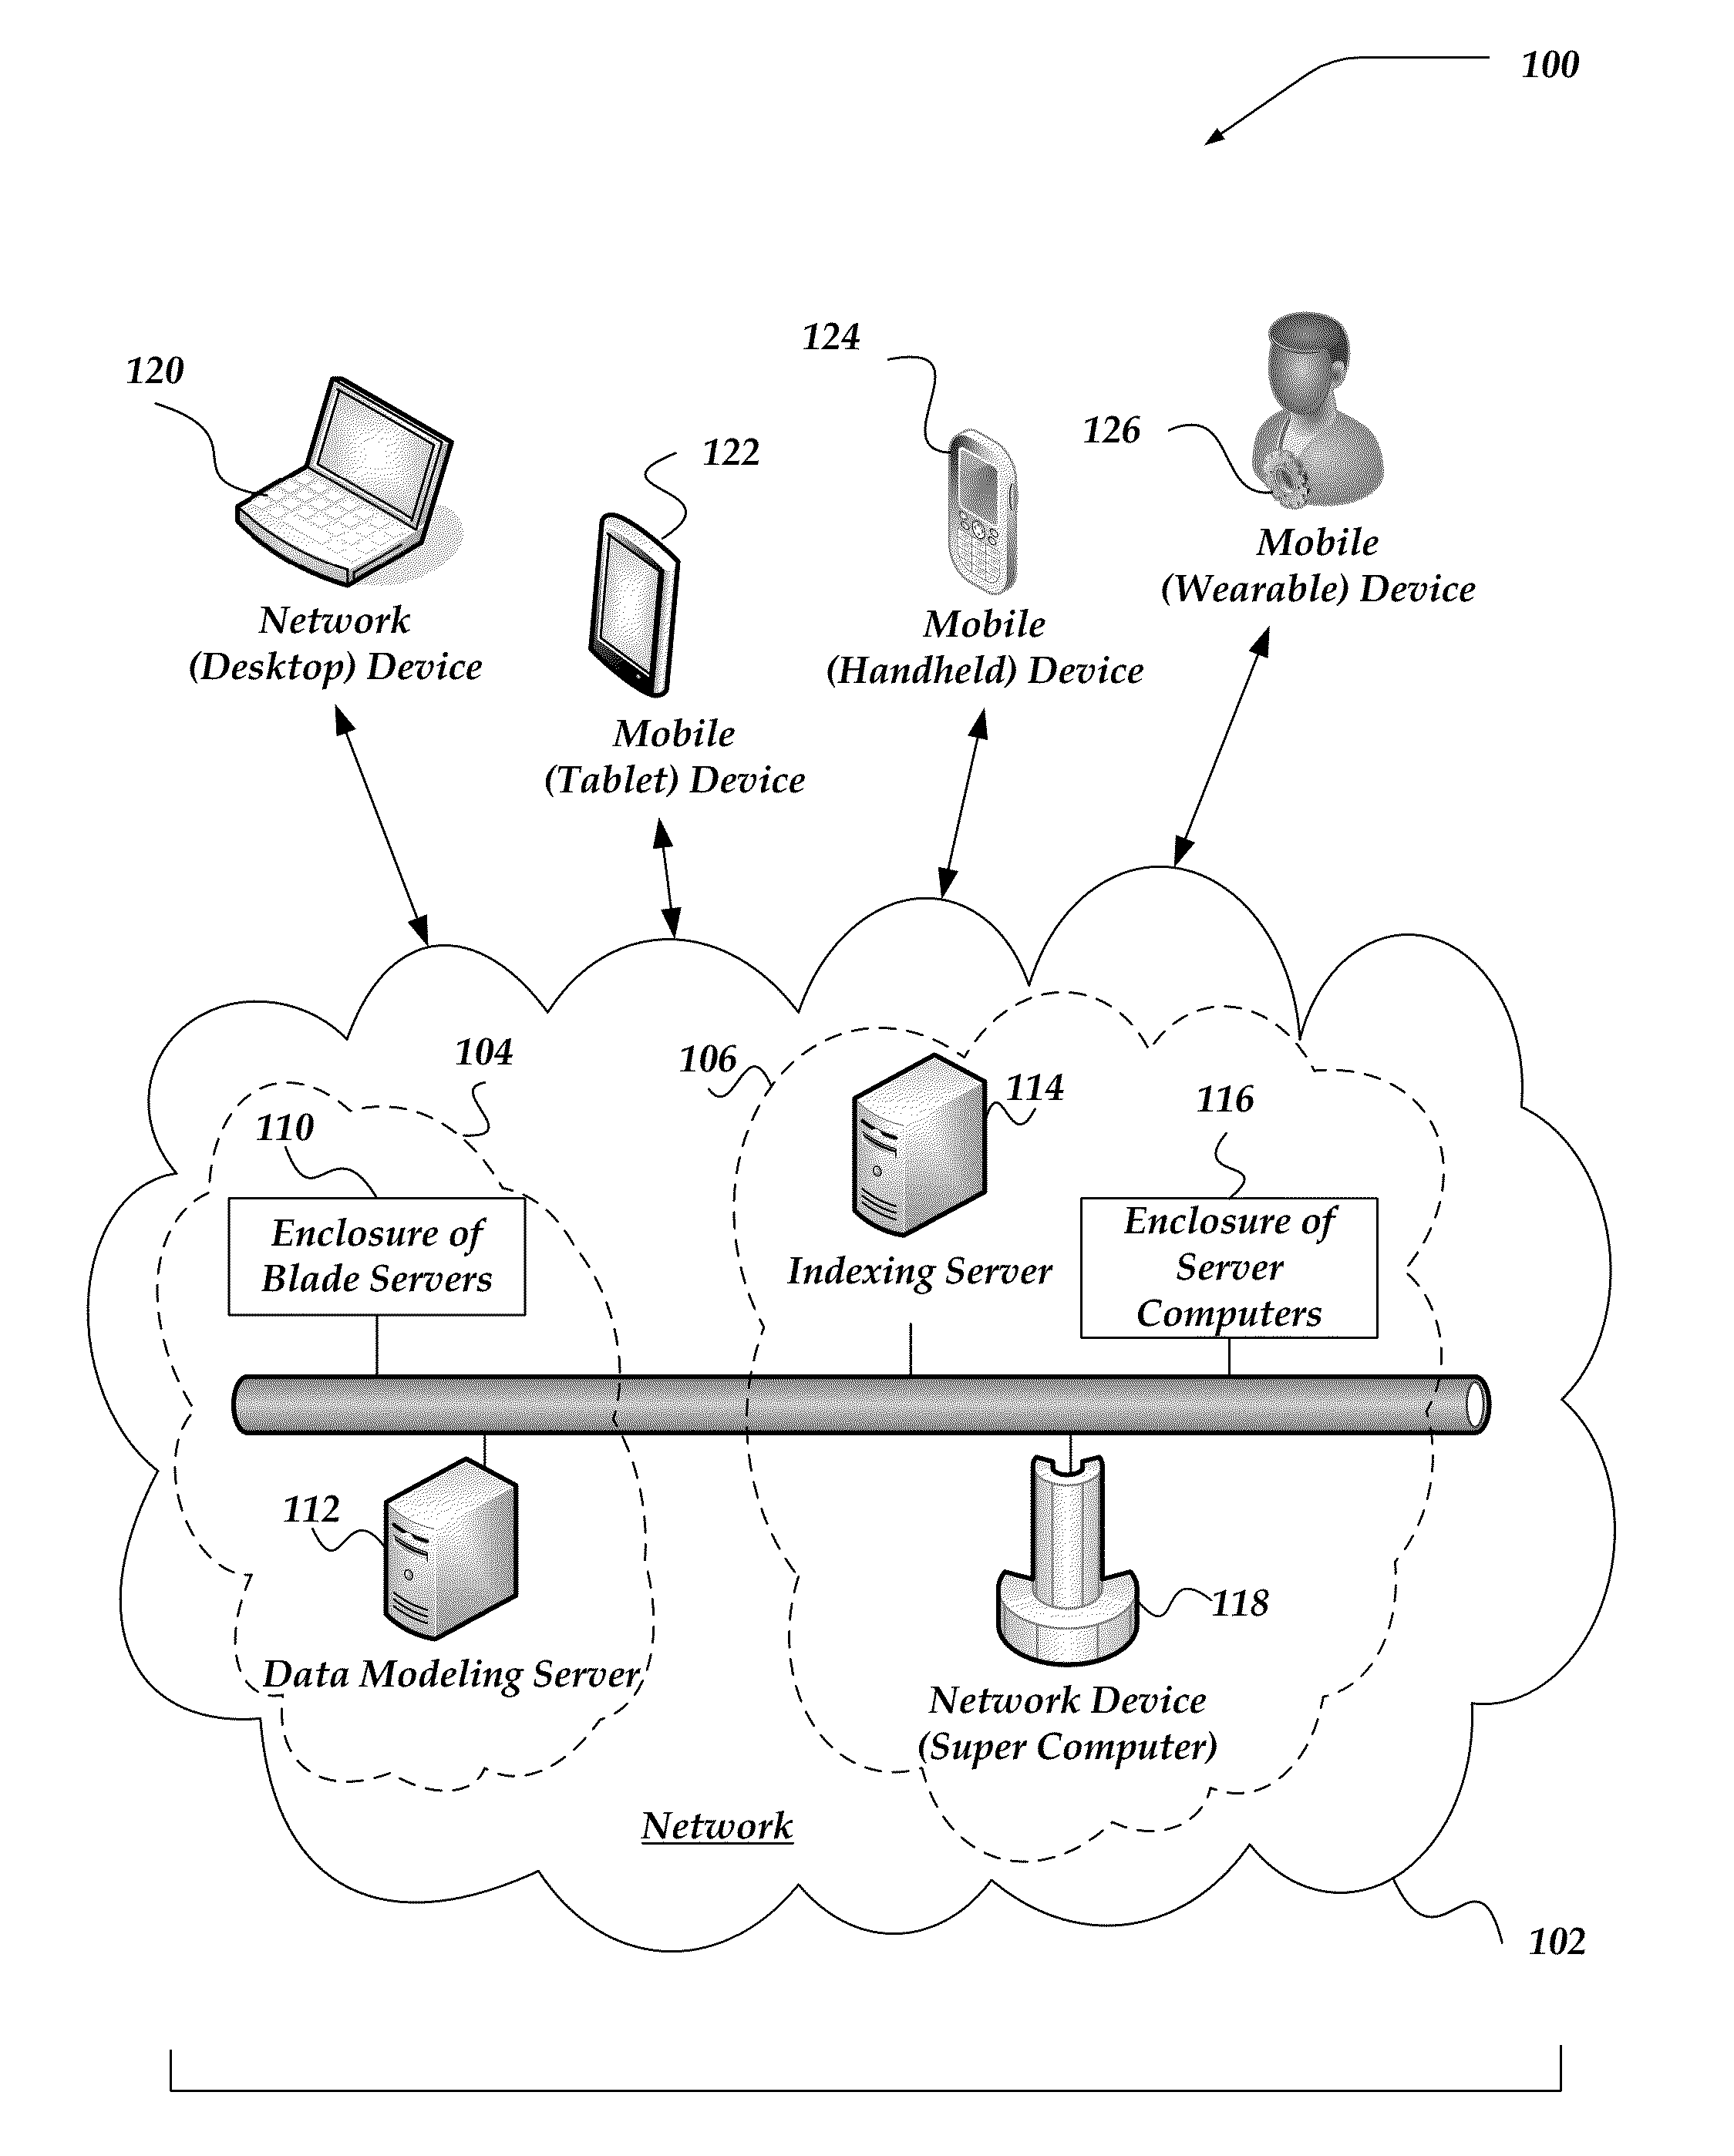 Generation of a data model applied to queries